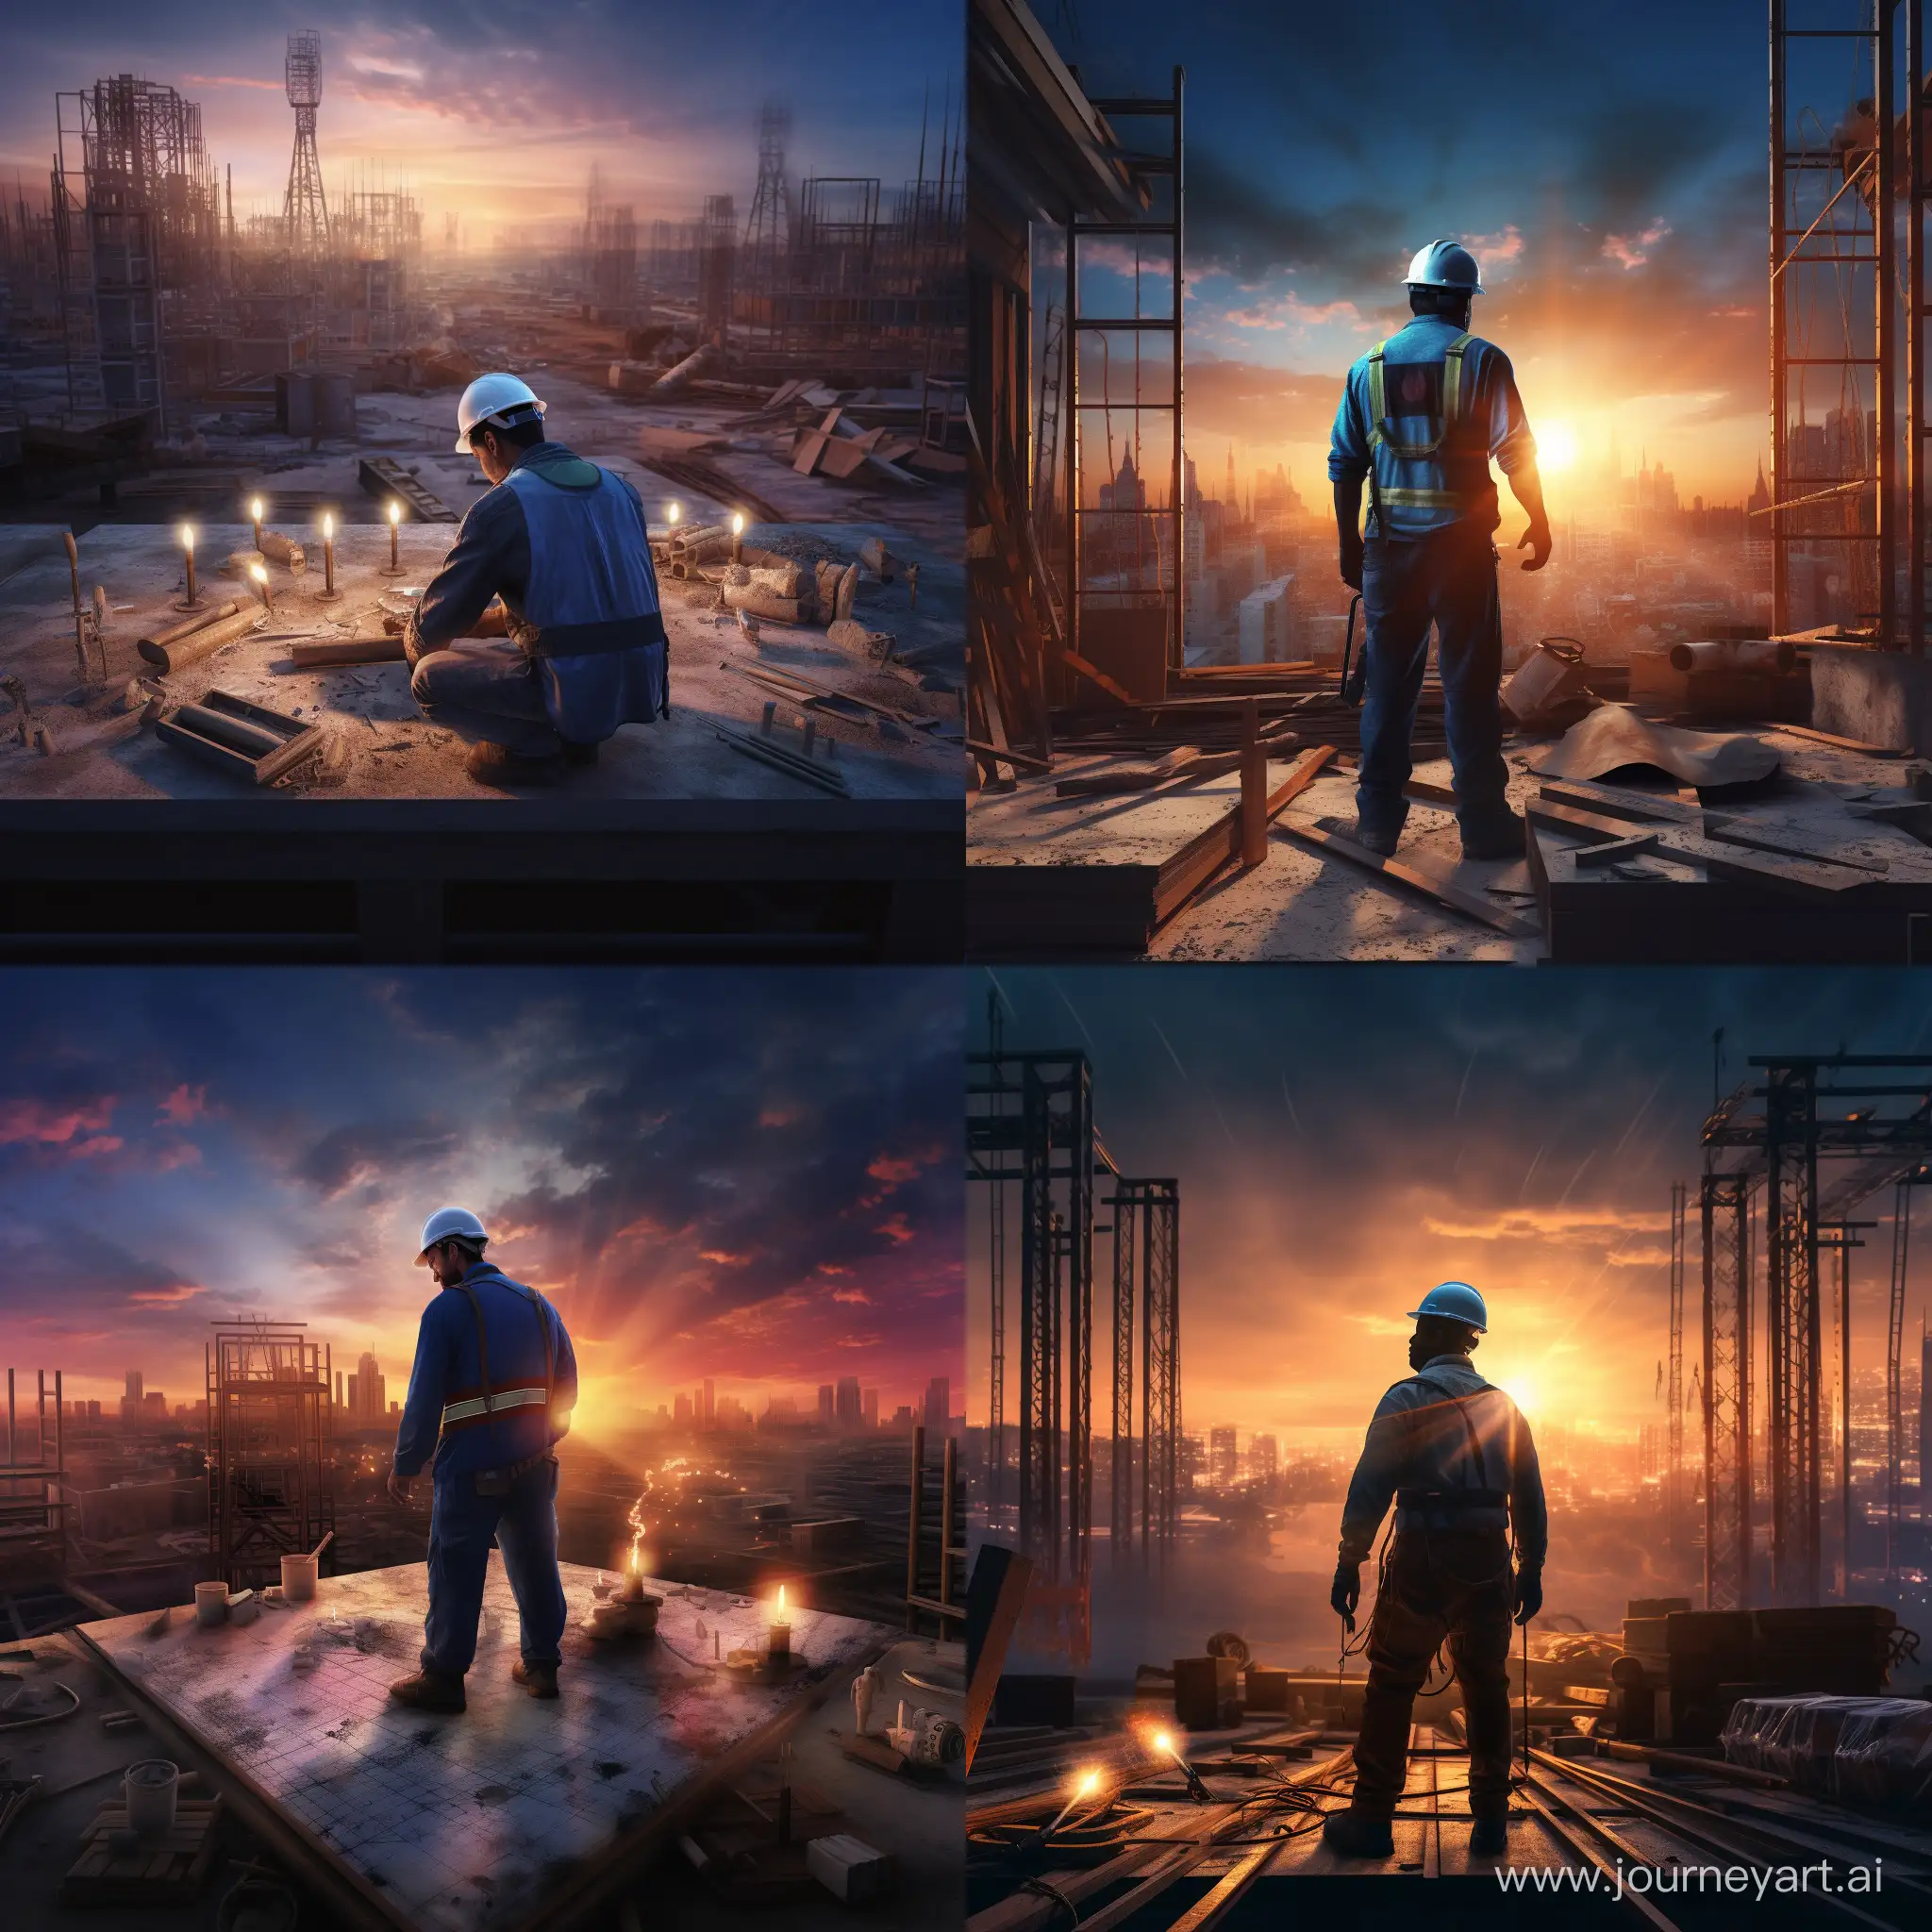 Image of a construction site at sunset, a builder in a uniform with a tool,Symbols of the construction process,Lighting effects, positive, blue colors, realistic